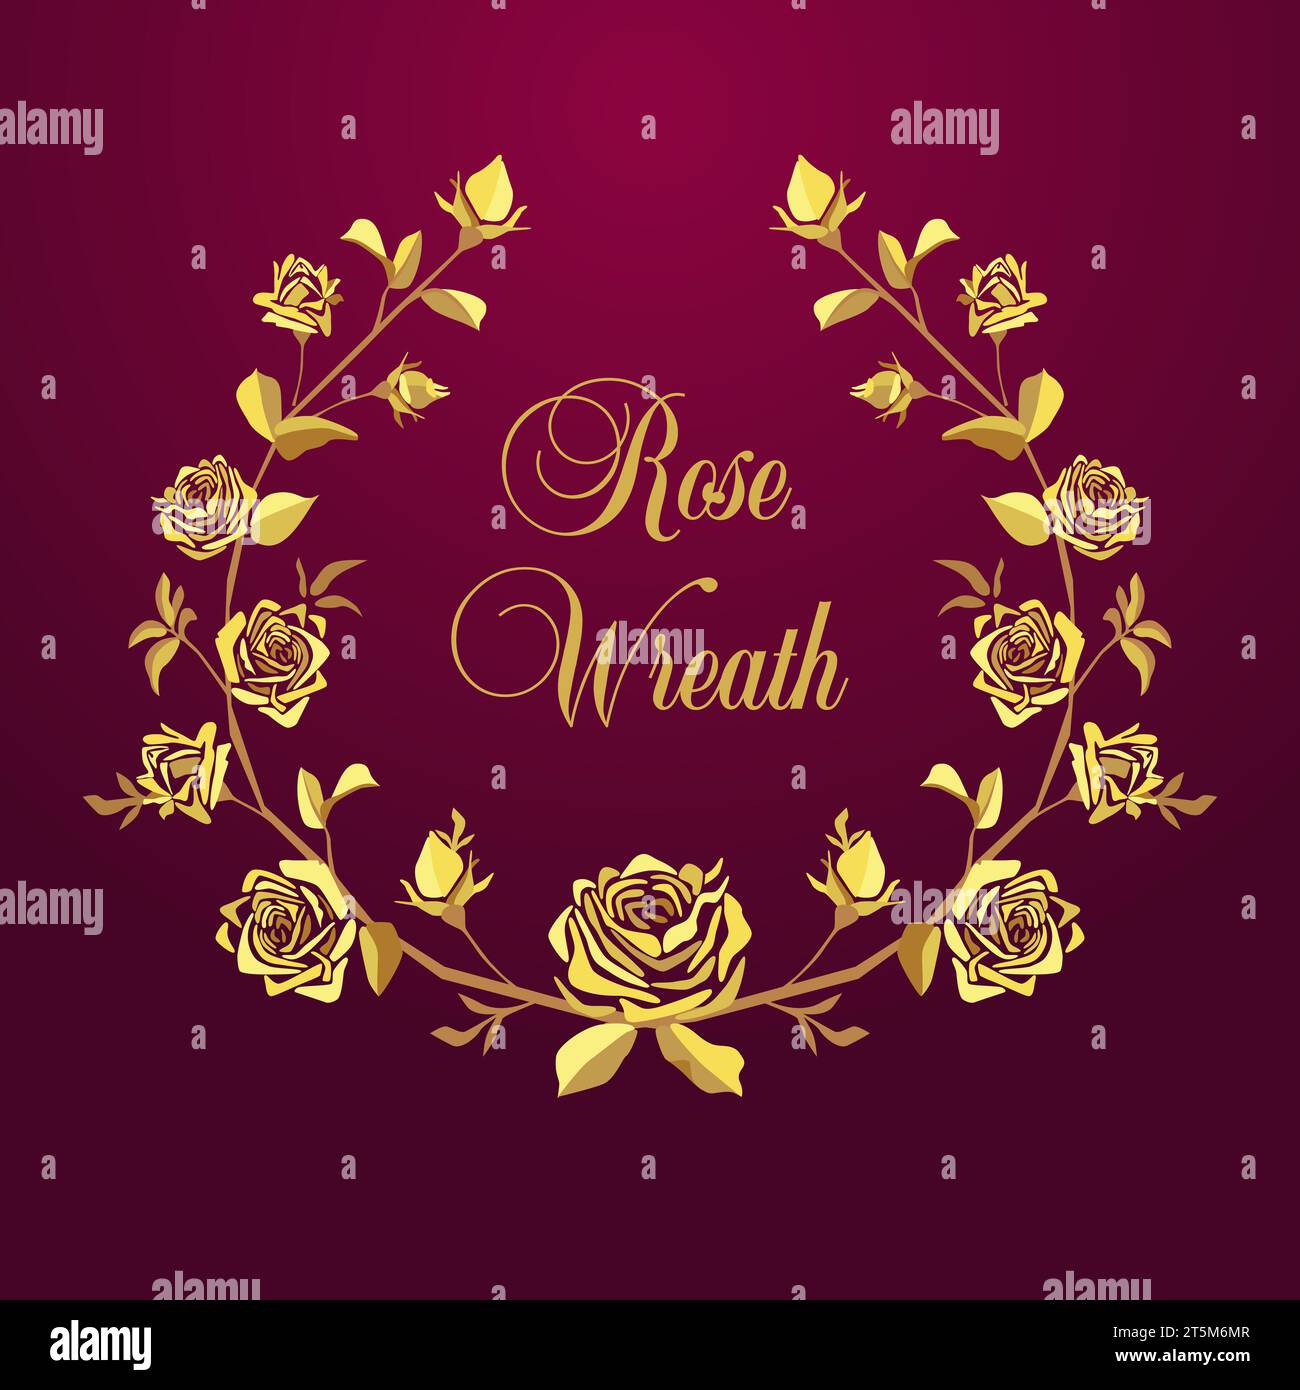 Awards logo design. Floral award symbol, golden icon. Round wreath with vintage roses. Decorative ornament. Isolated sign with flowers and leaves. Stock Vector